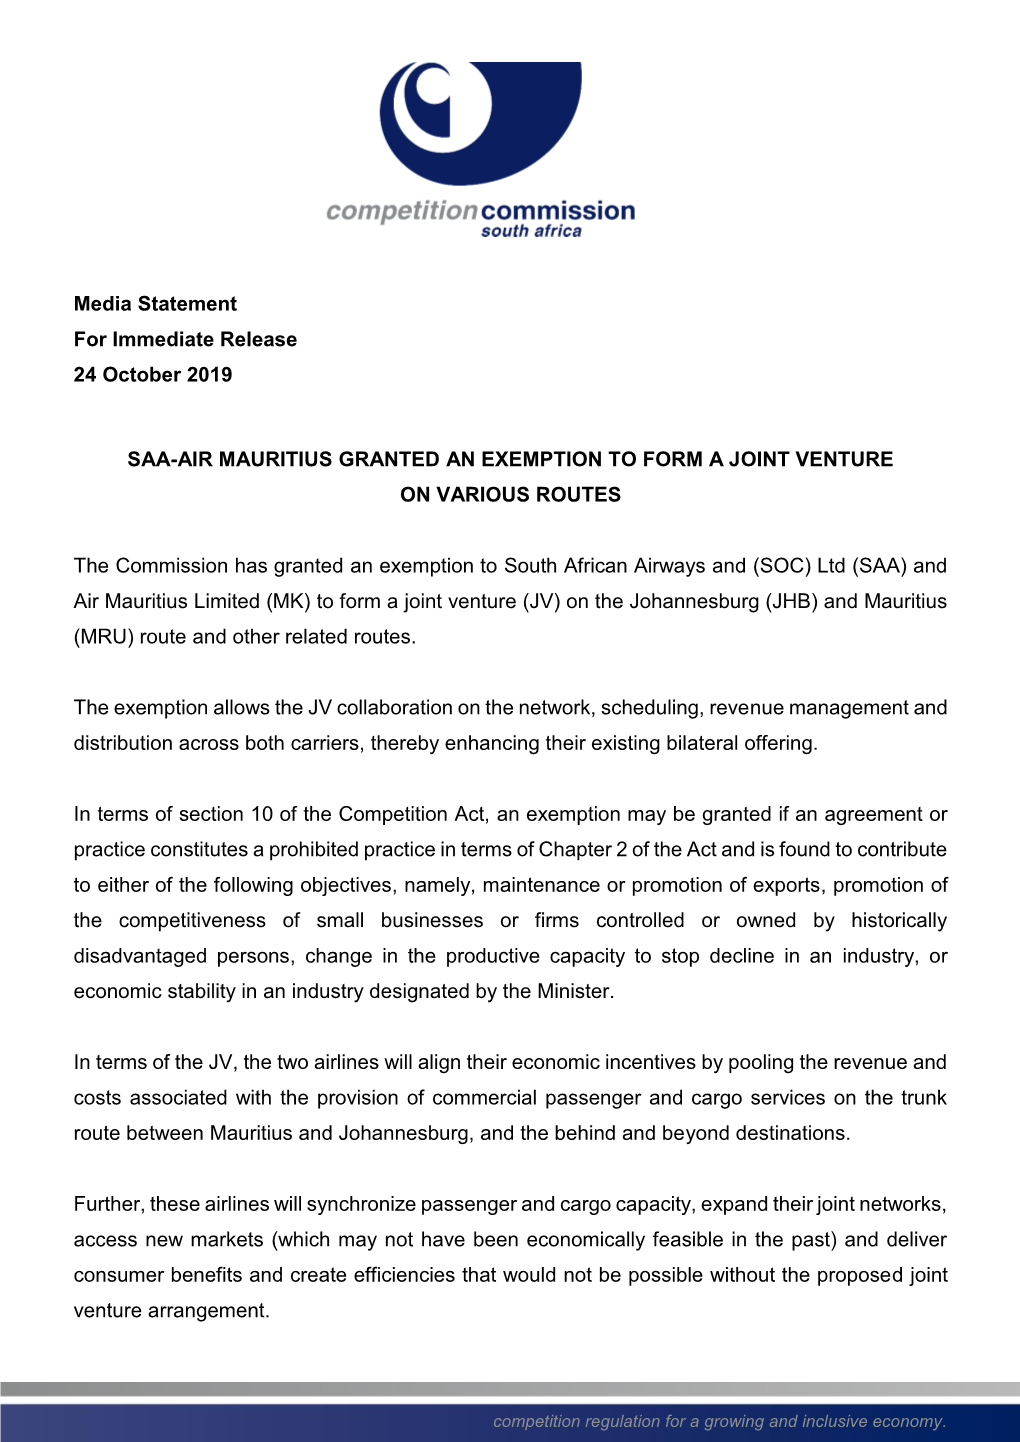 Media Statement for Immediate Release 24 October 2019 SAA-AIR